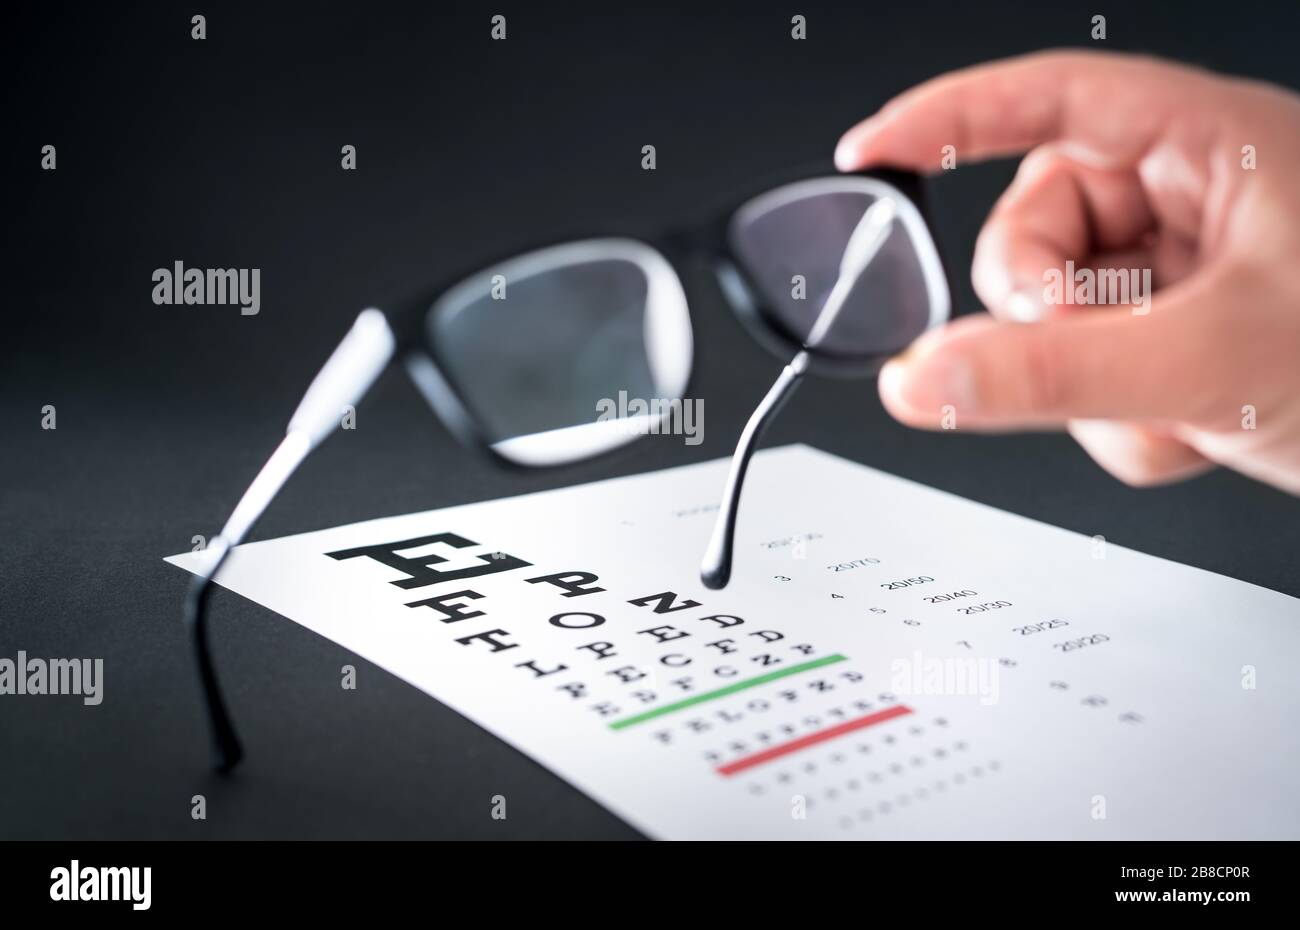 Optician holding glasses. Eyesight test chart in the background. Eye doctor fixing and repairing spectacles or lenses. Optometrist or ophthalmologist. Stock Photo